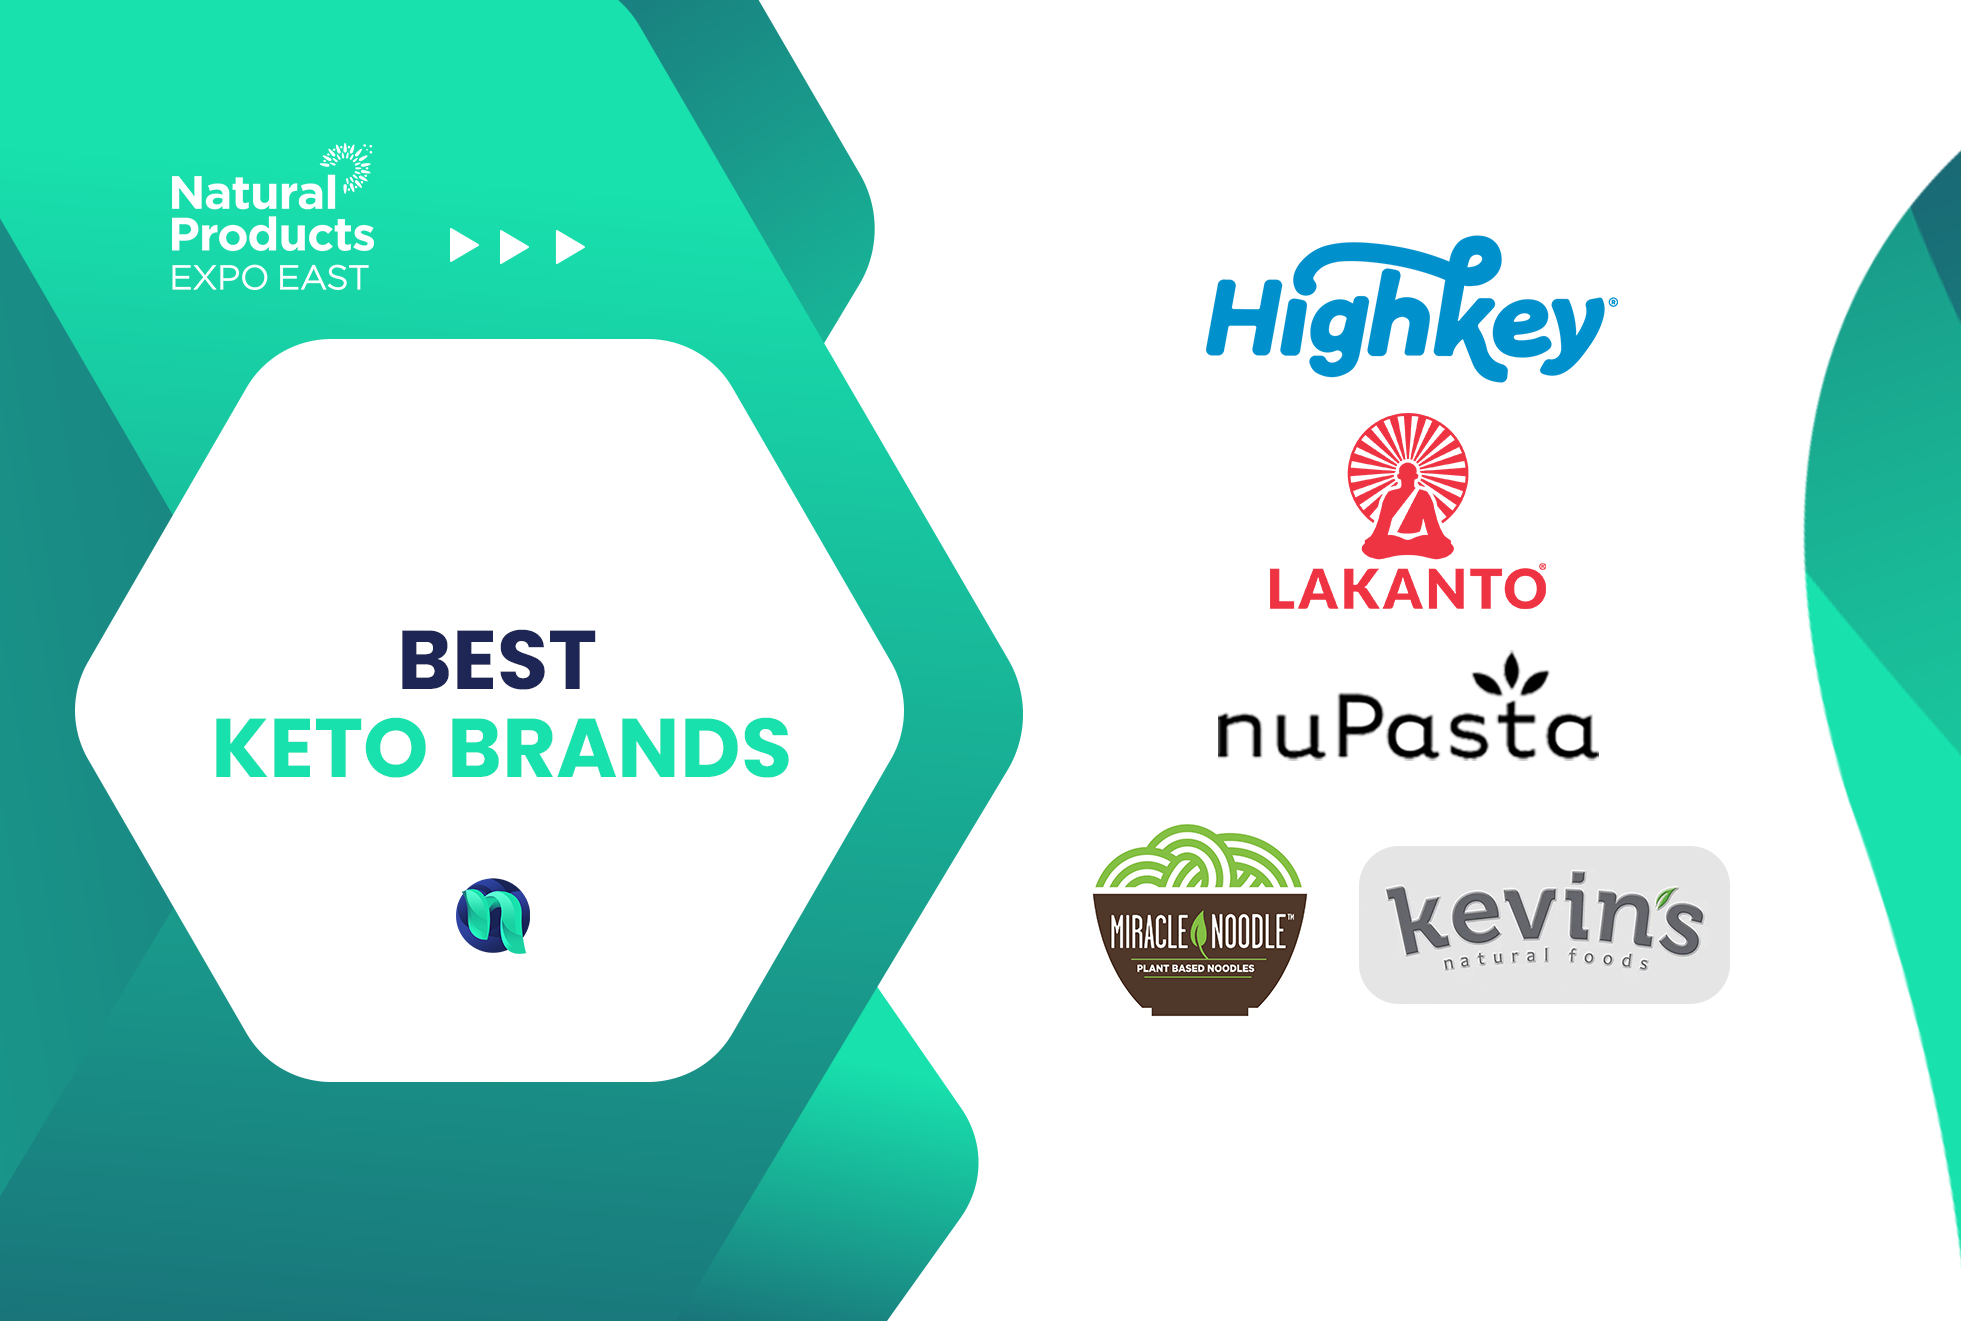 Keto Brands at expo east 2022